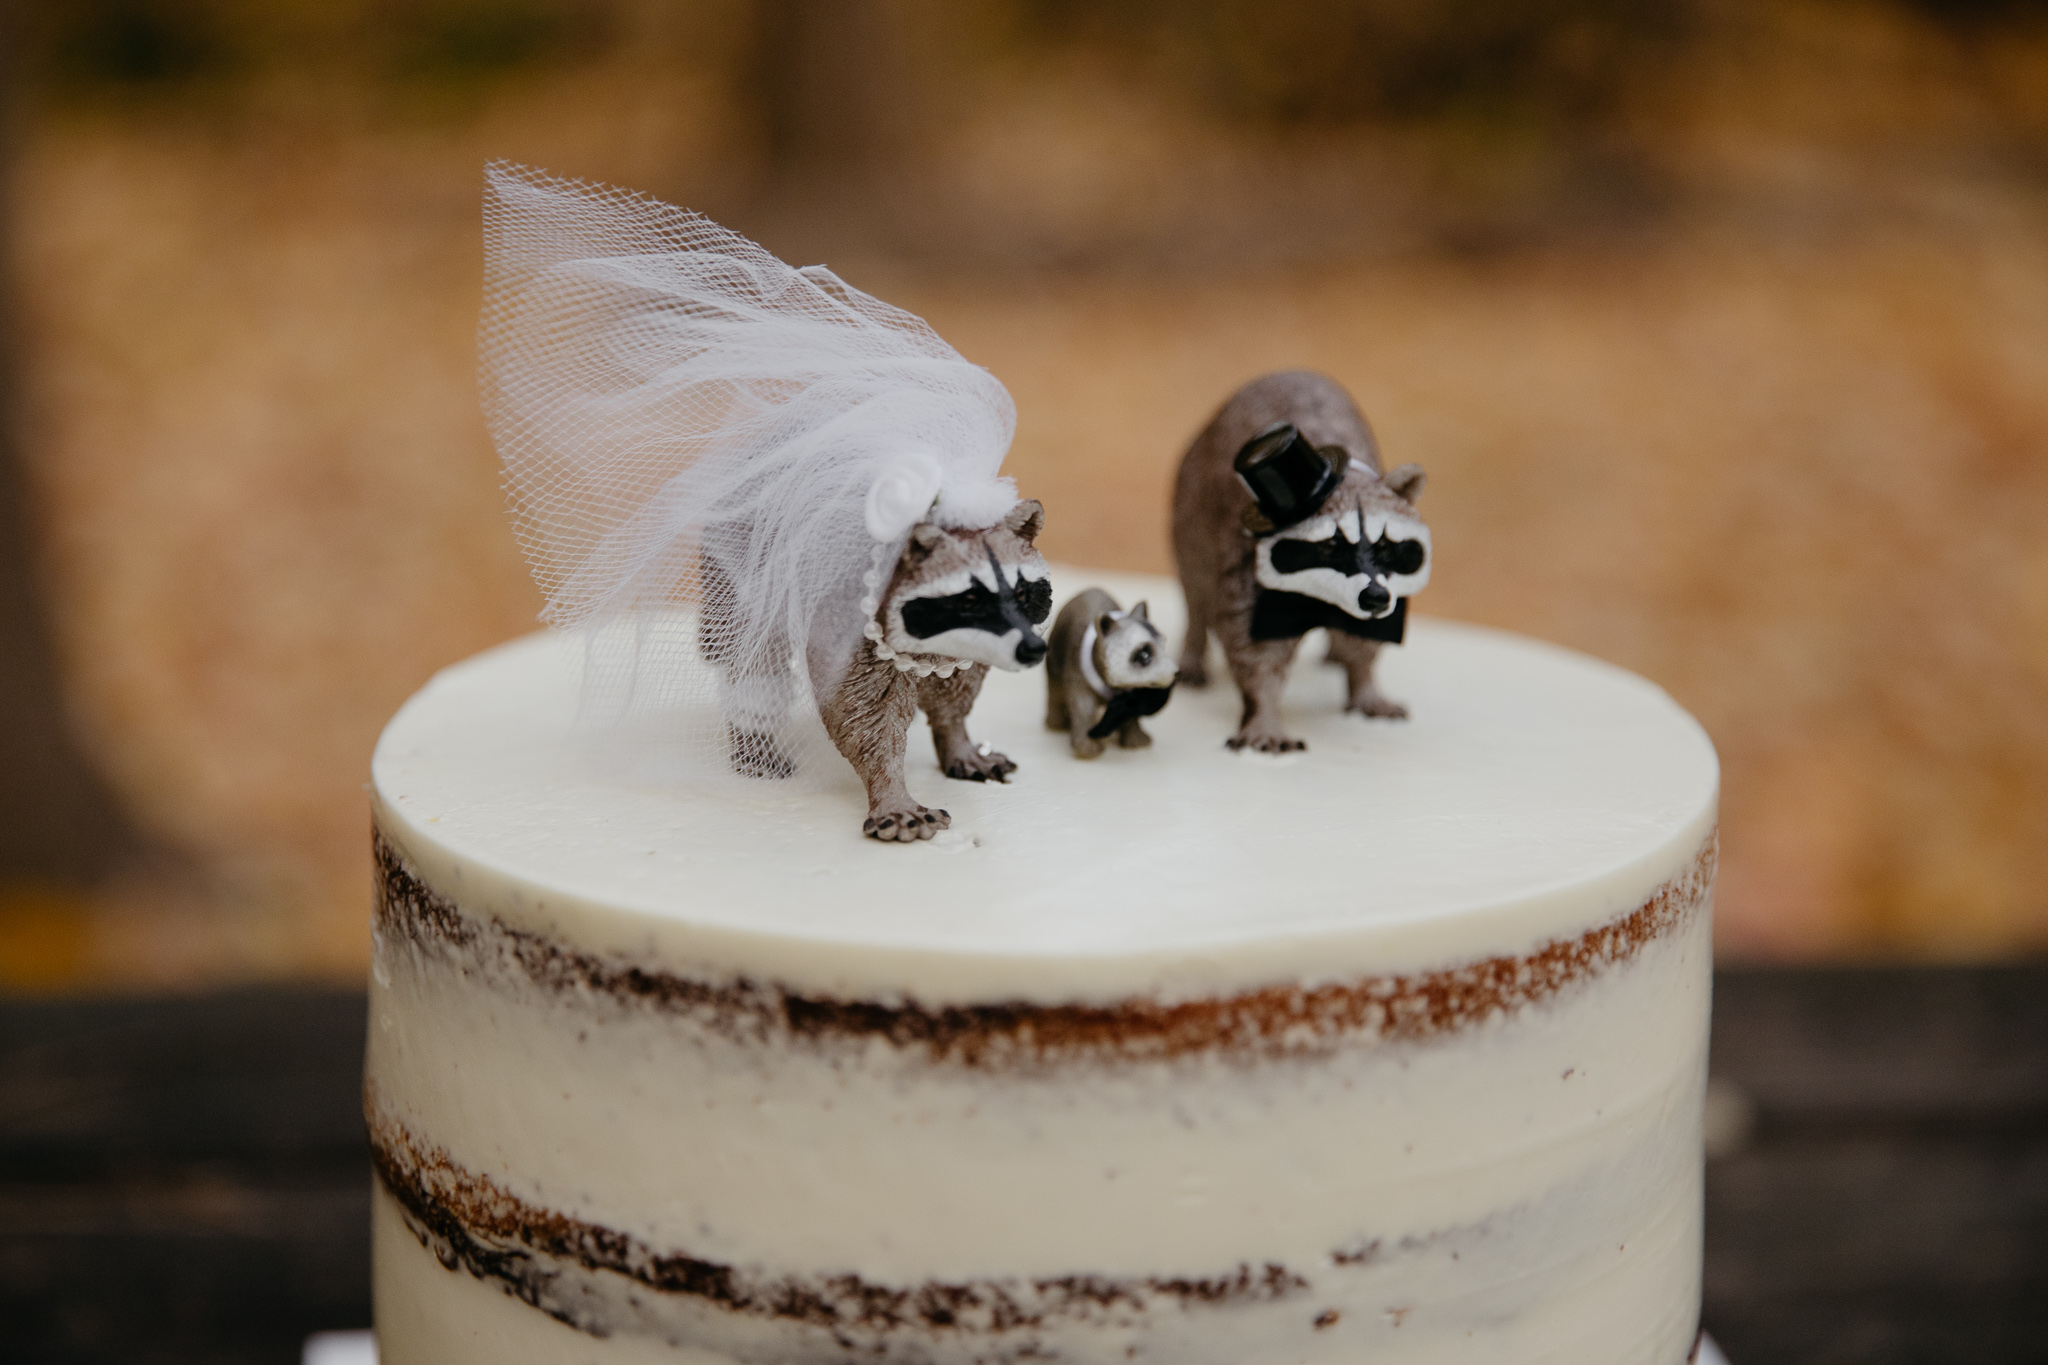 Racoon cake toppers on wedding cake at campsite during a fall elopement